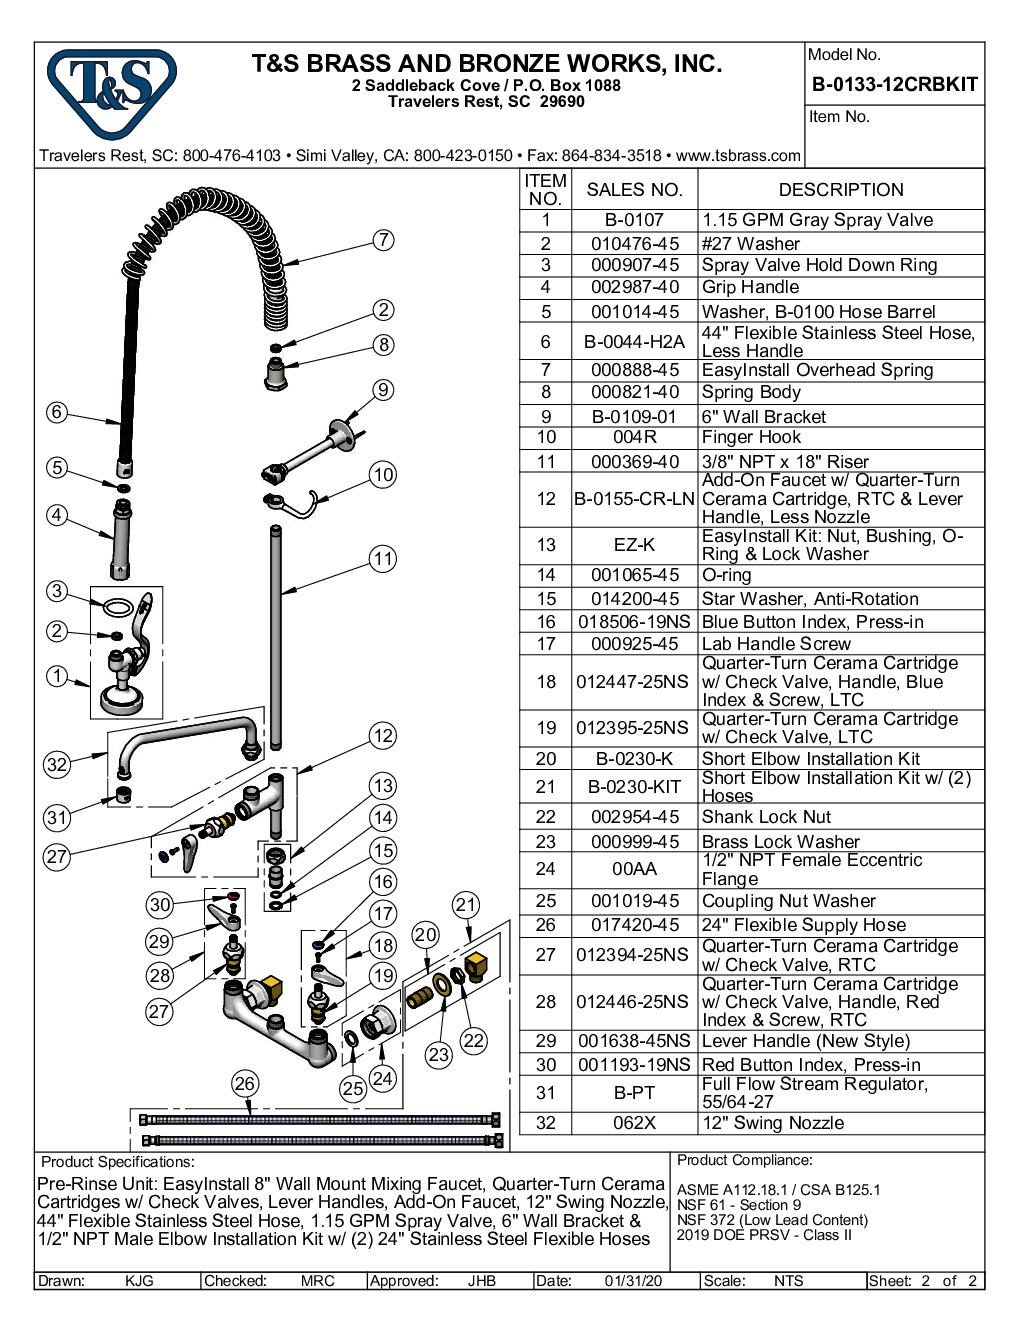 T&S Brass B-0133-12CRBKIT with Add On Faucet Pre-Rinse Faucet Assembly